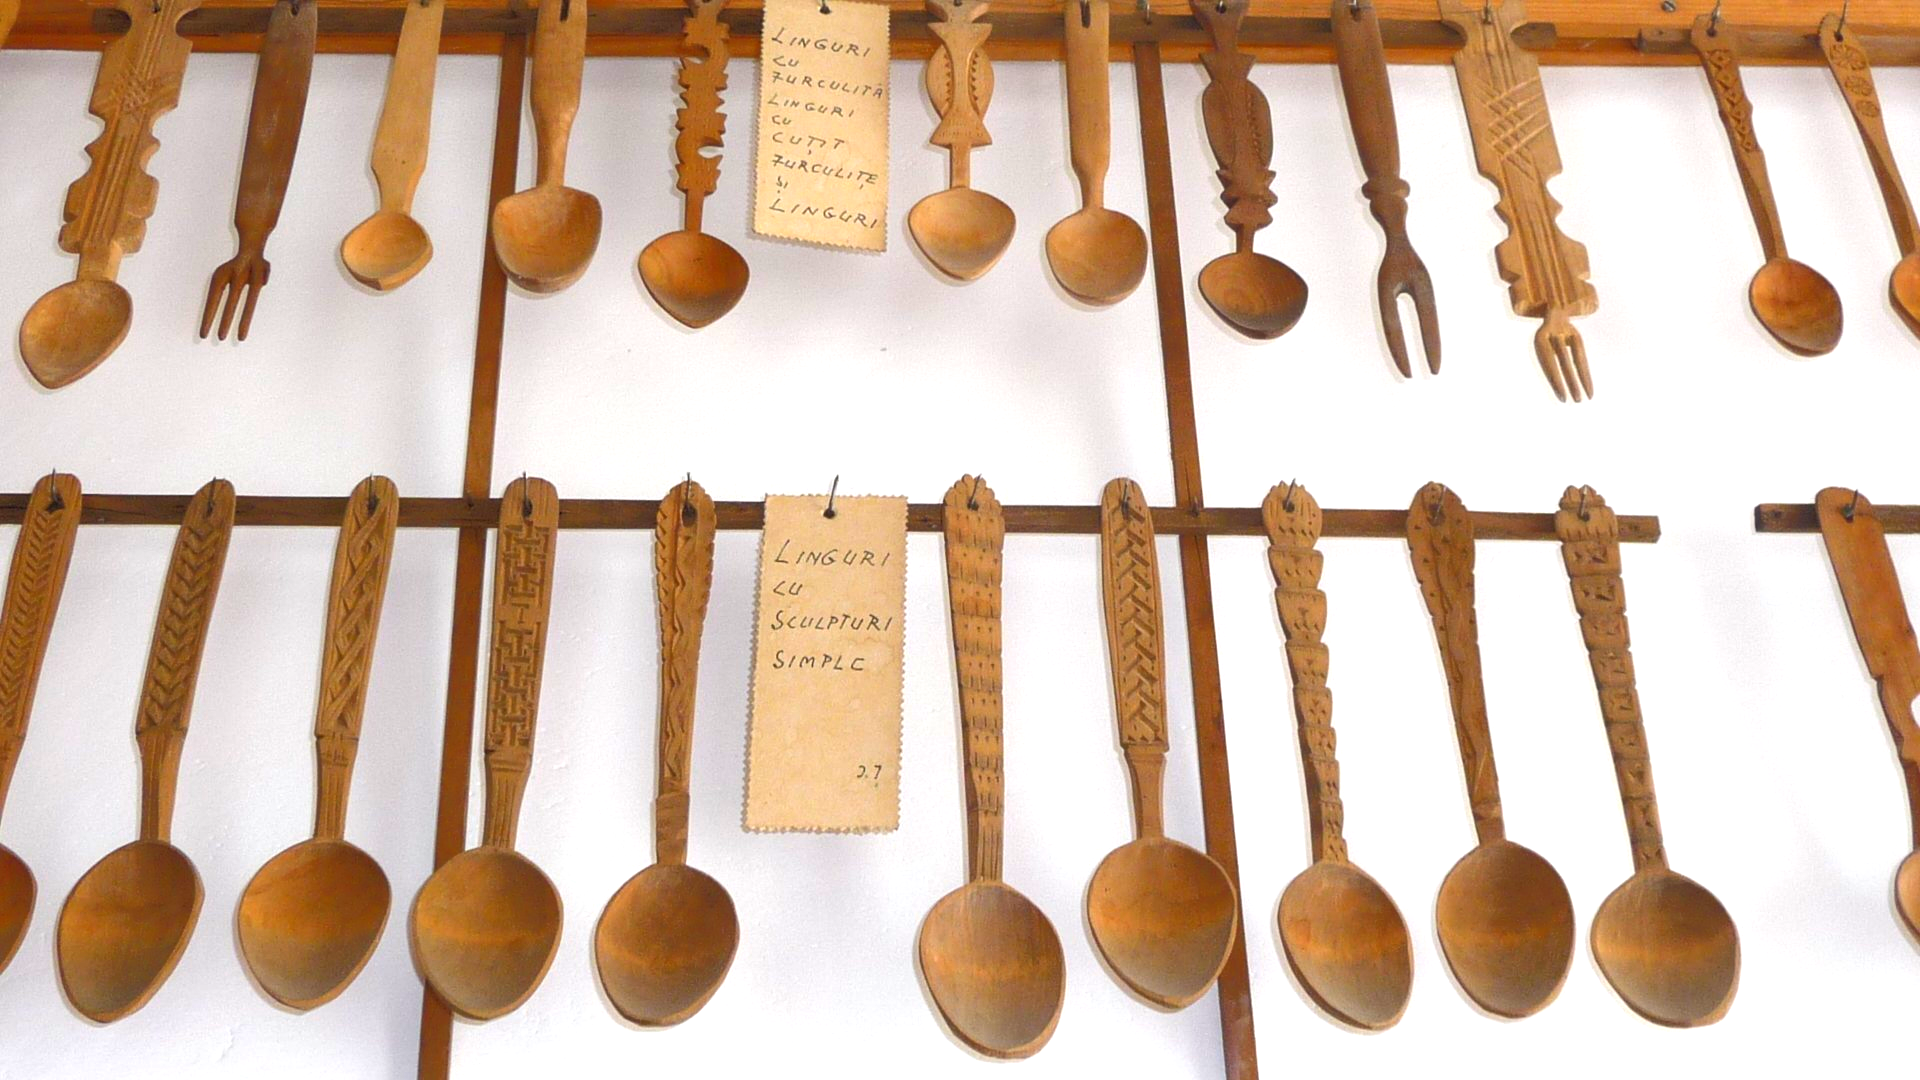 World's largest collection of wooden spoons, world record set in Romania